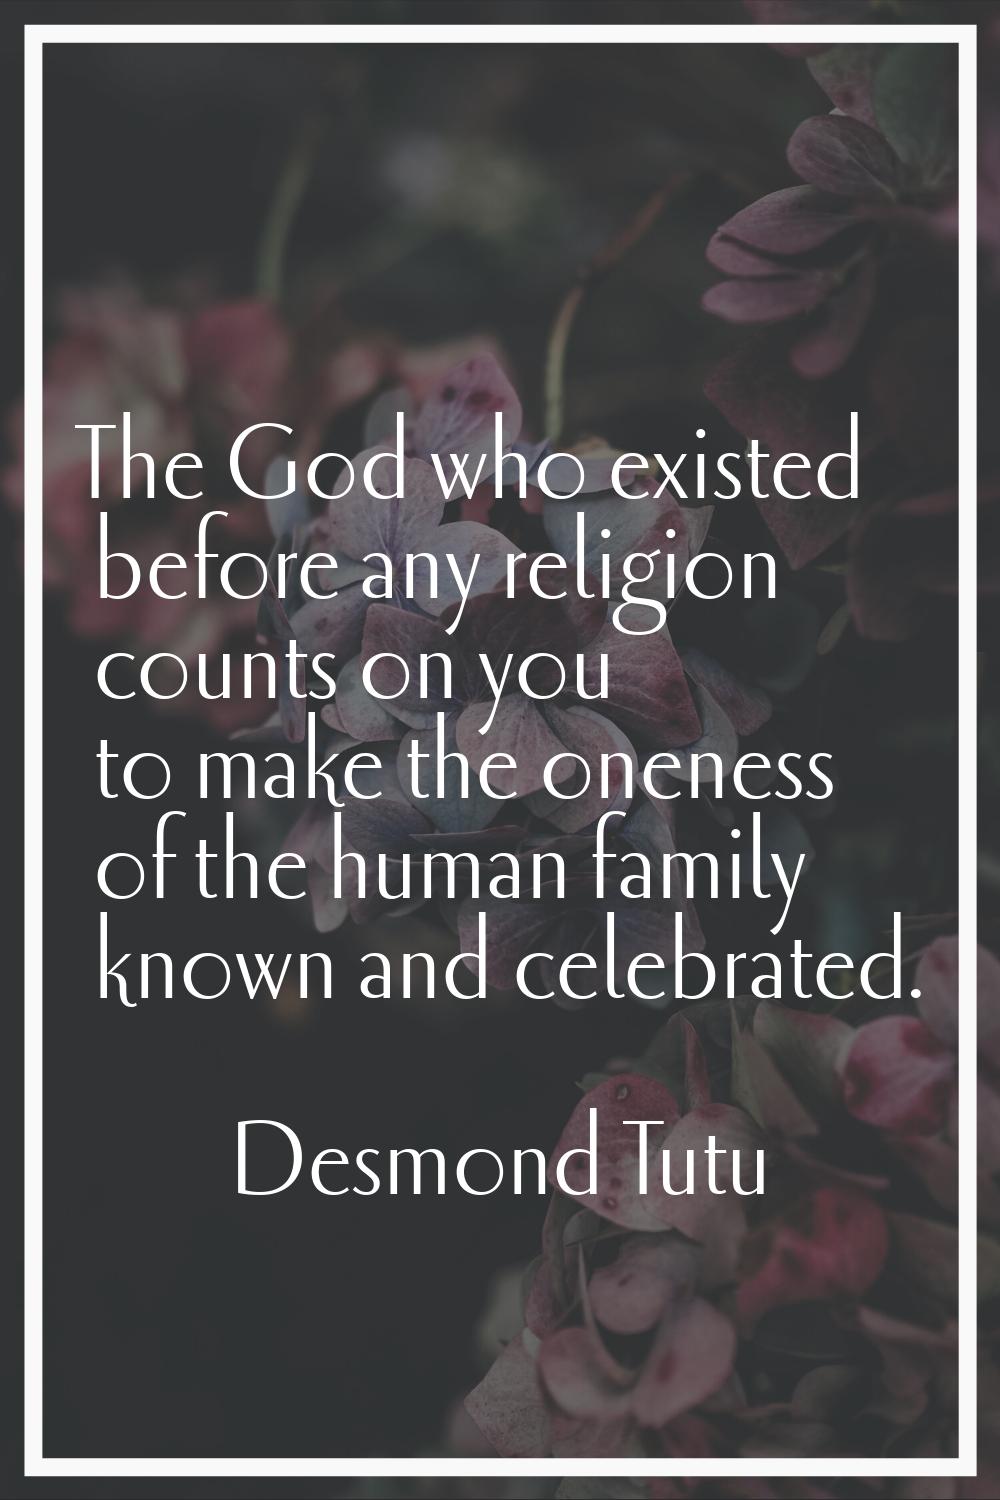 The God who existed before any religion counts on you to make the oneness of the human family known